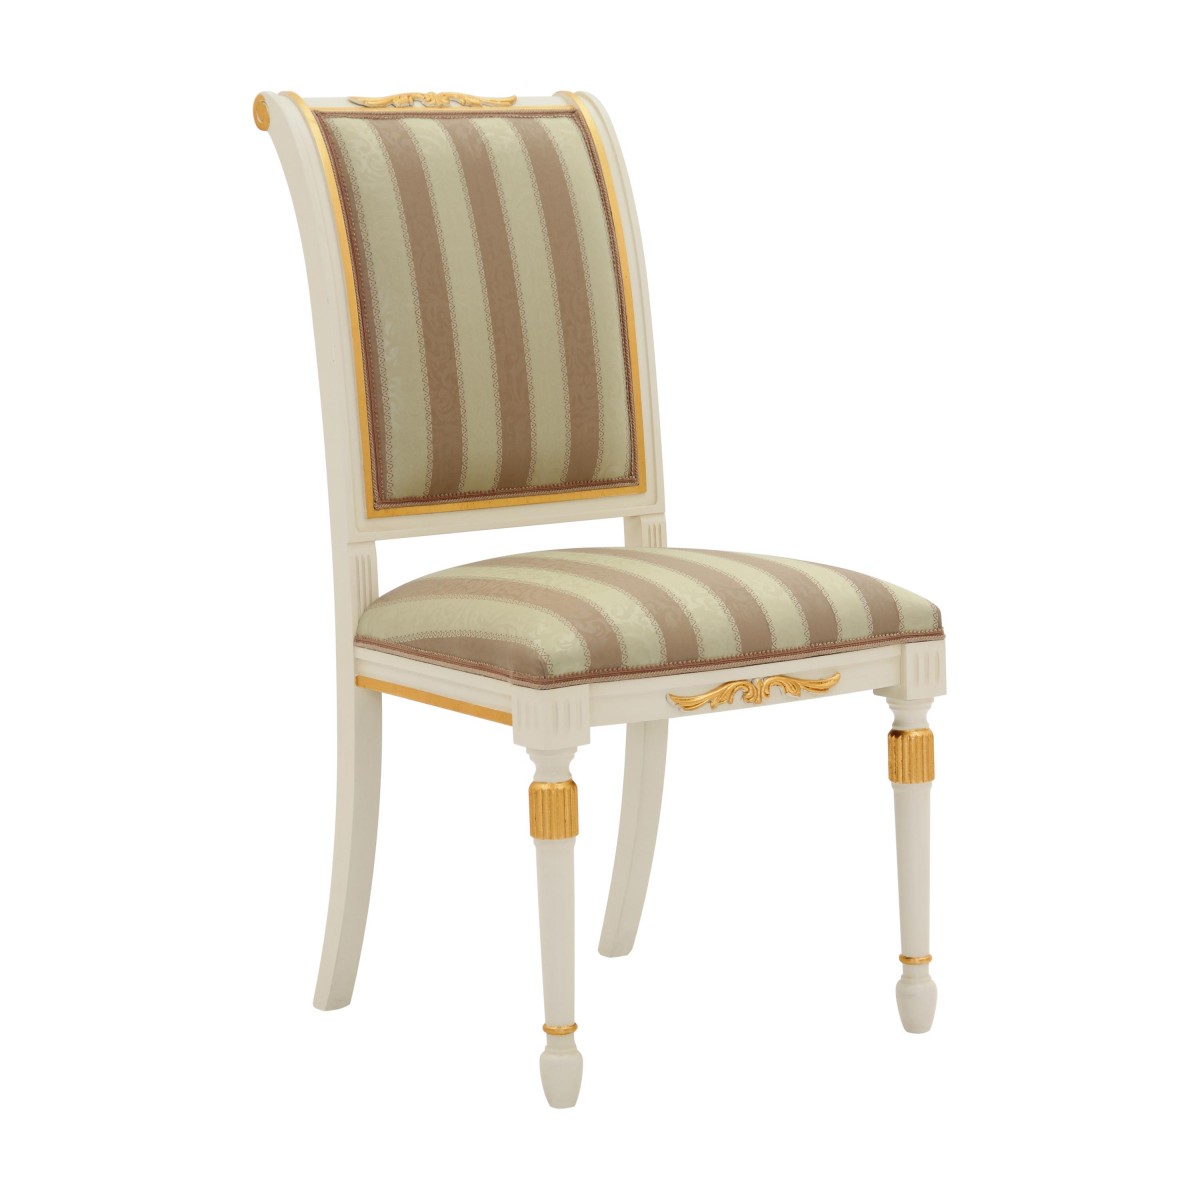  Replica chair in empire style  Salgari by Sevensedie in classic design - beech wood frame - Upholstered in stripe gold and salmon fabric.